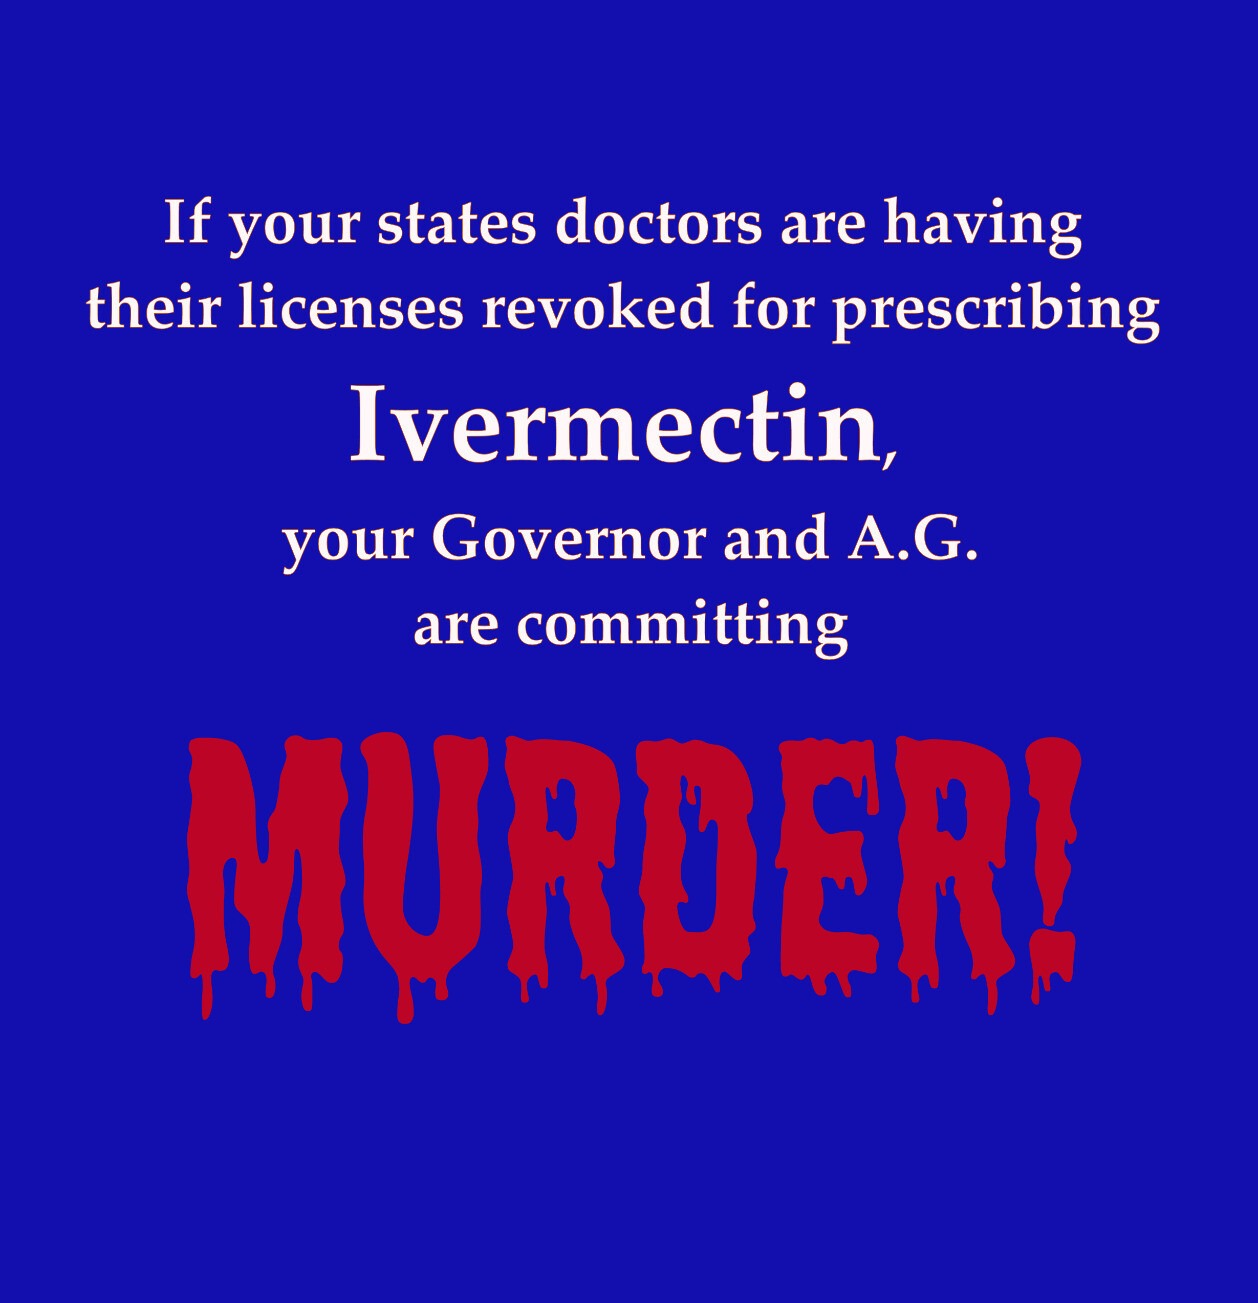 States forbidding the use of life saving Ivermectin and HCQ are committing MURDER! | image tagged in ivermectin,hydroxychloriquine,hcq,murder,crimes against humanity,nuremberg trials are coming | made w/ Imgflip meme maker